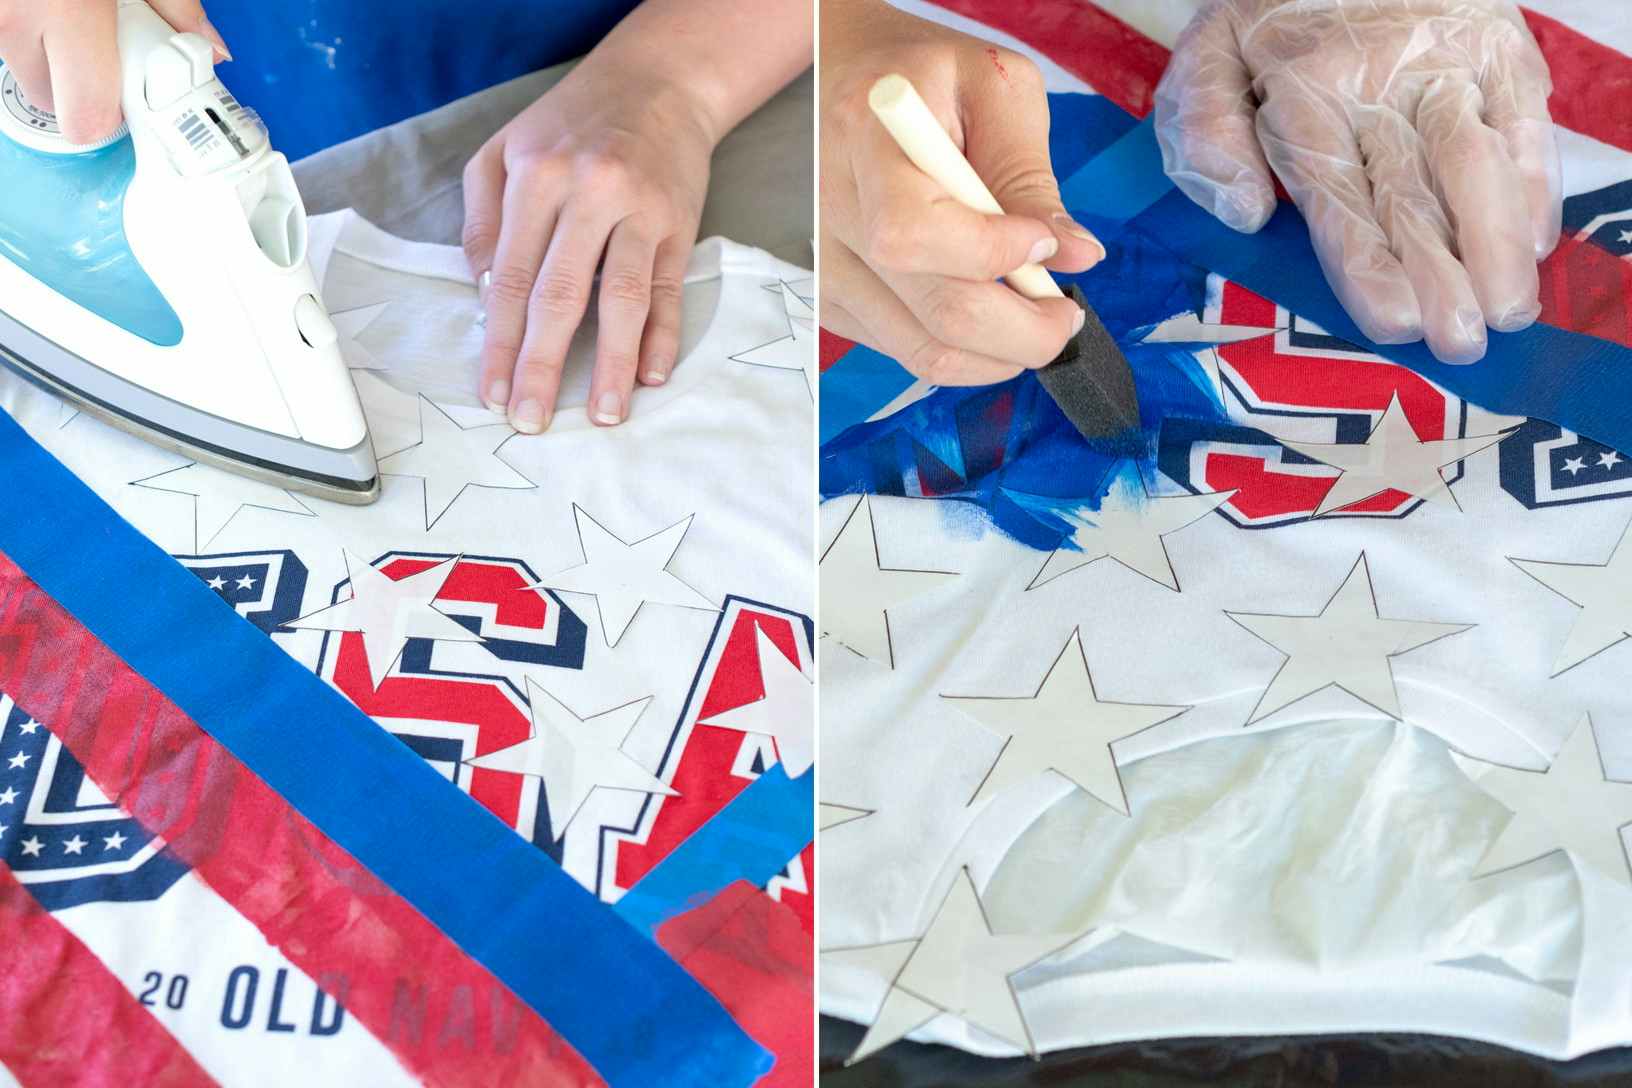 A person's hands adhering stars to an Old Navy USA shirt that is being painted to look like the American flag, and painting on the blue section.